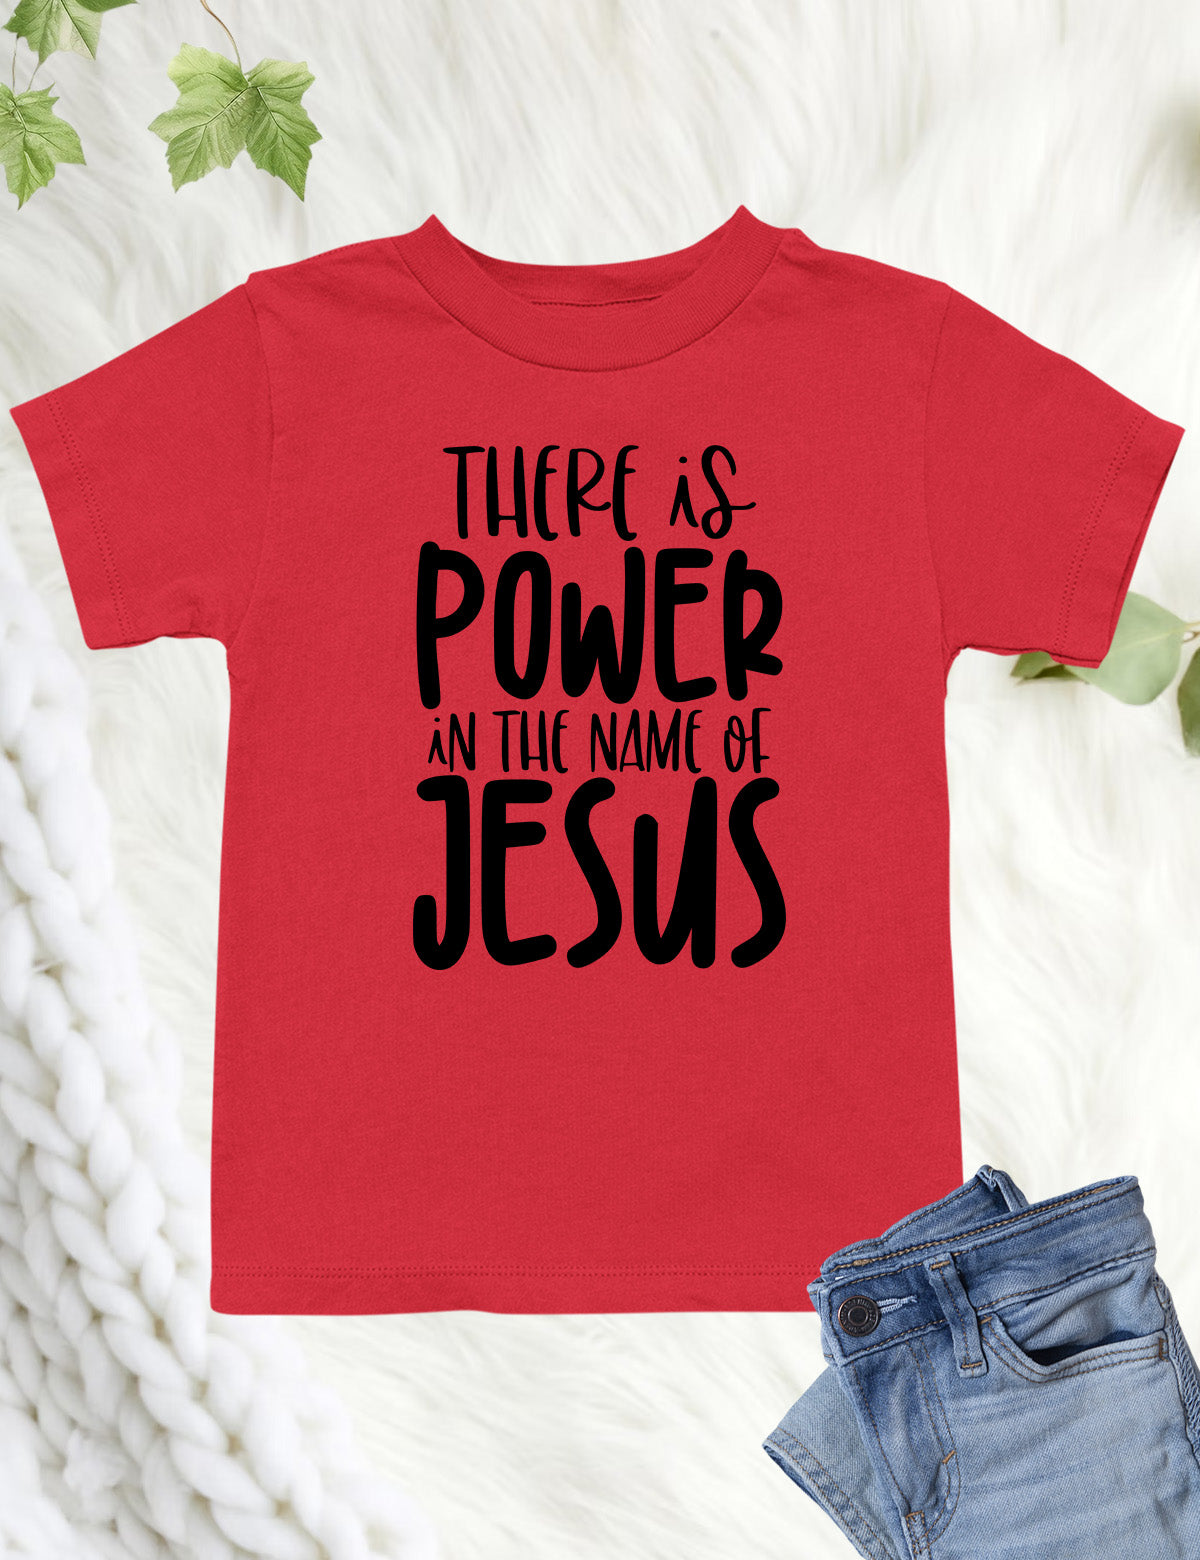 There is a Power in The Name of Jesus Kids Shirt